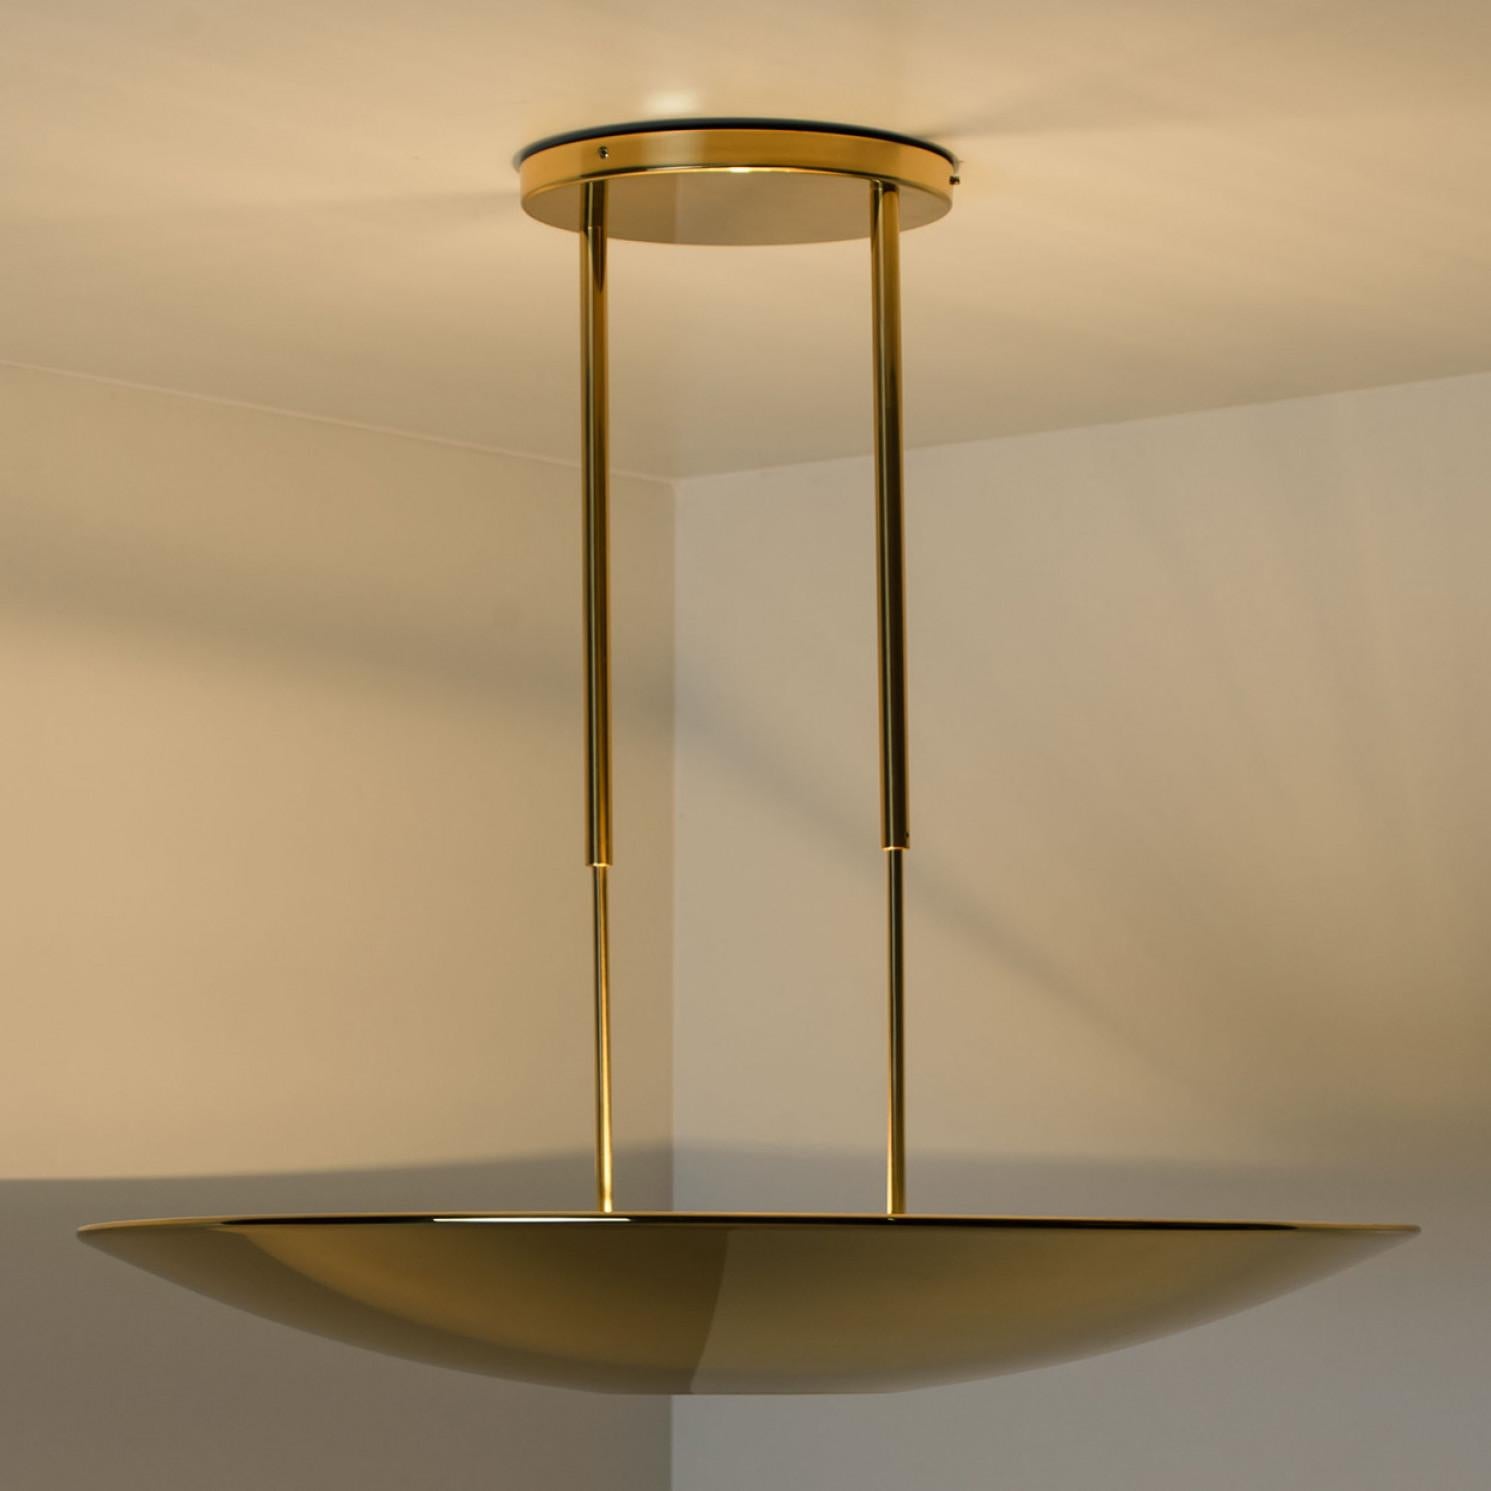 Other Florian Schulz 'Sola 80' Brass Pendant Lamp or Ceiling Fixture